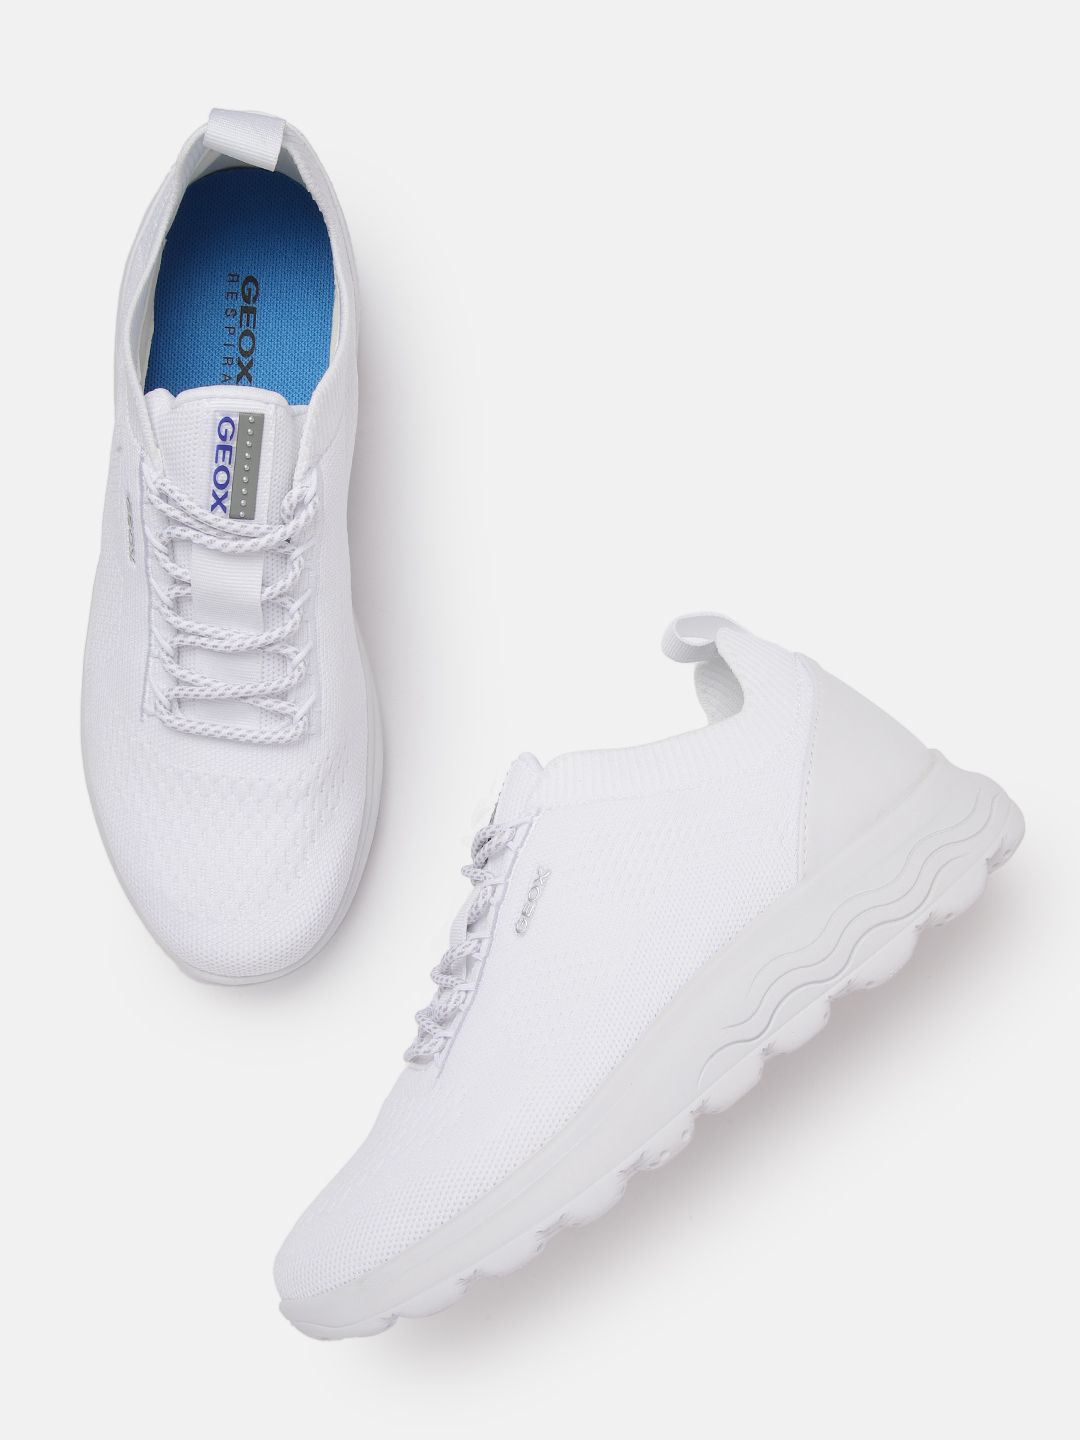 Geox Women White Solid Lightweight Sneakers Price in India